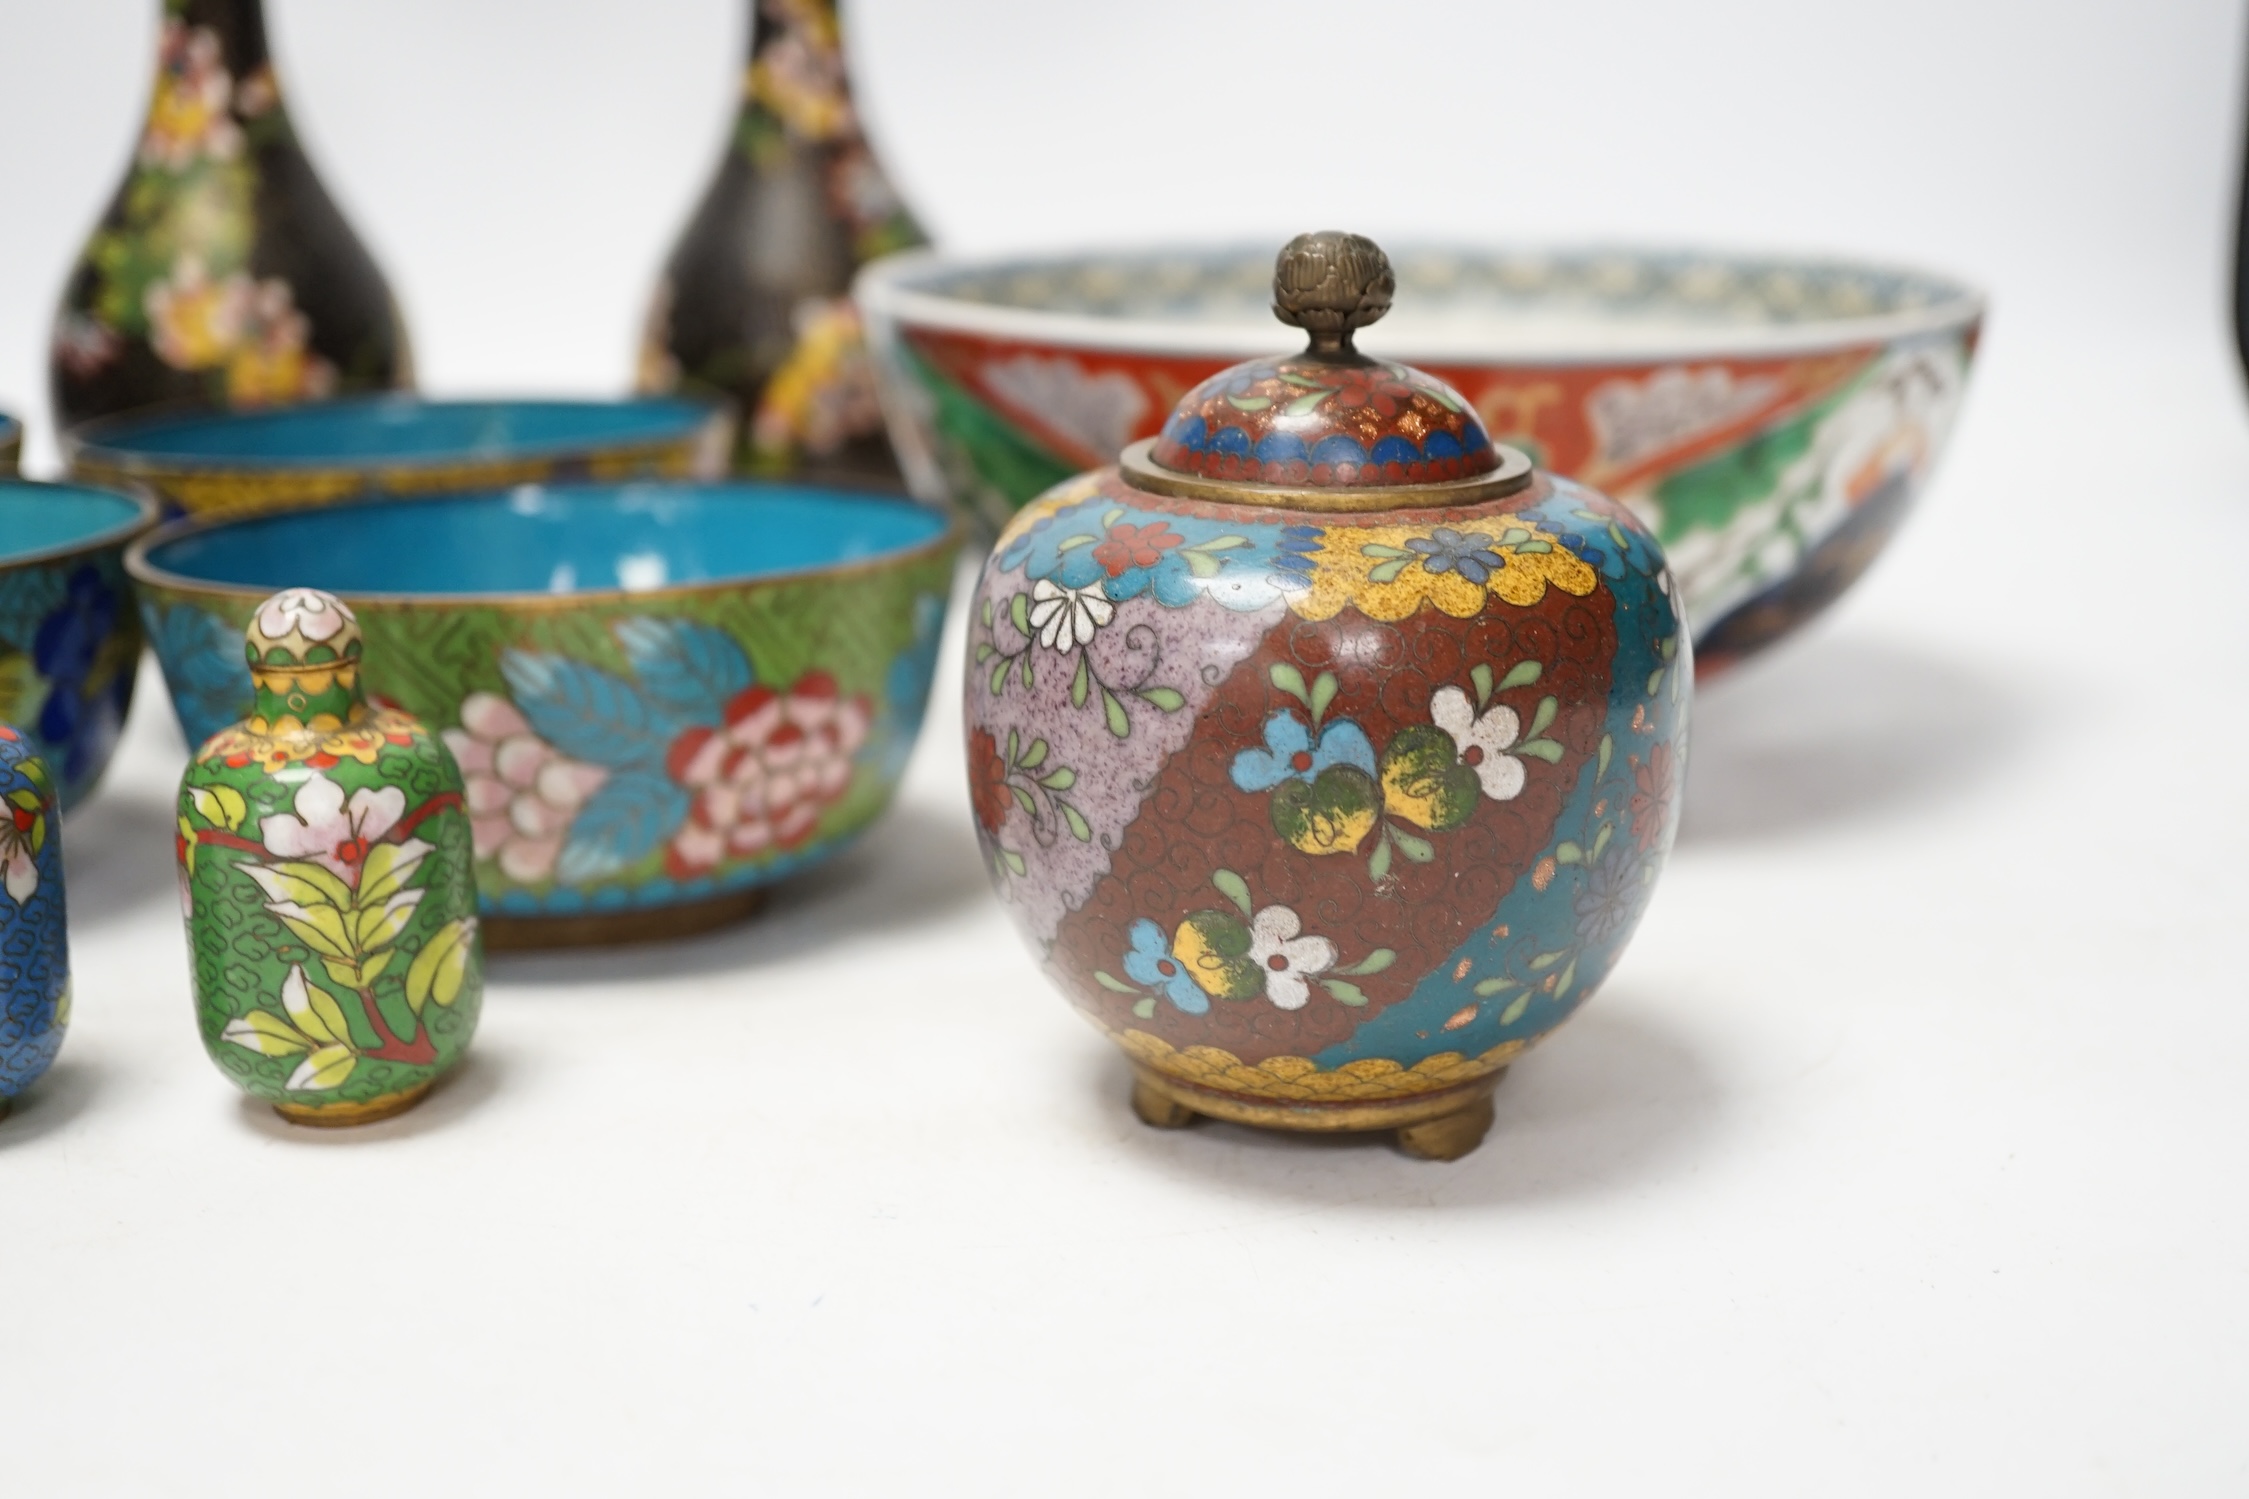 A Japanese Arita bowl and a quantity of Japanese and Chinese cloisonné enamel wares, tallest 17cm. Condition - fair